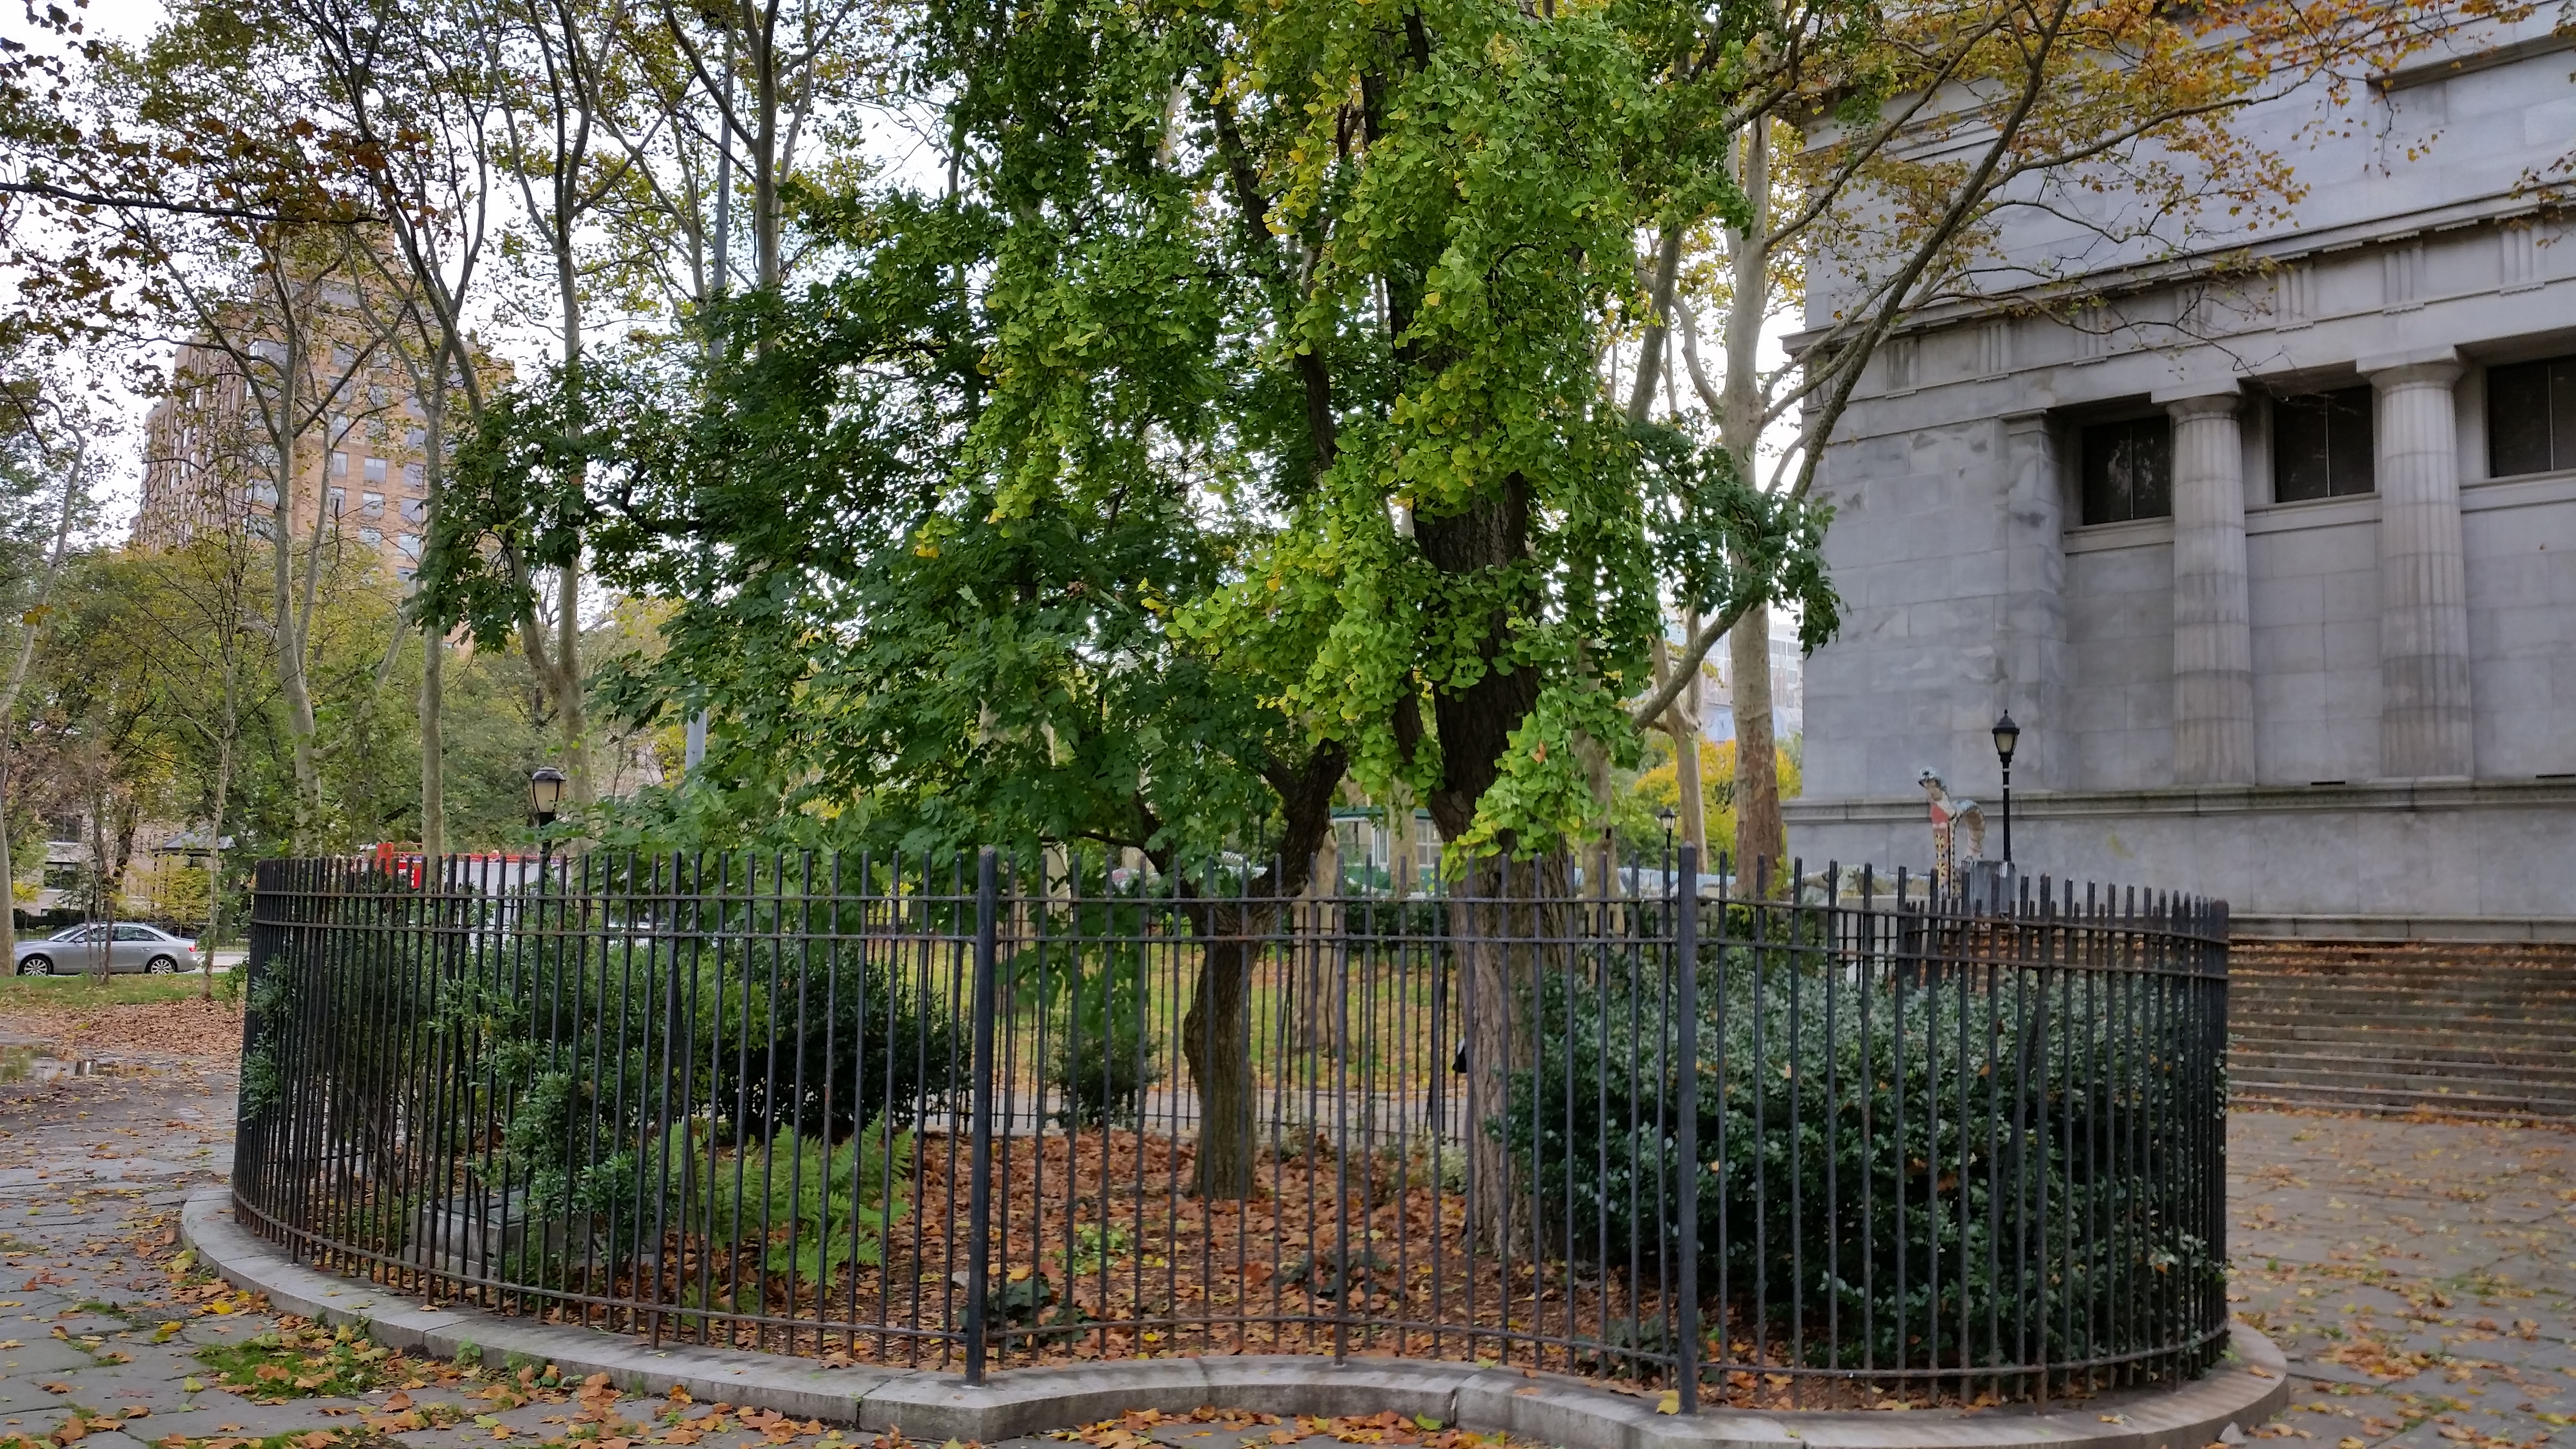 A black wrought-iron fence surrounds two trees. The enclosure is located directly behind the tomb.